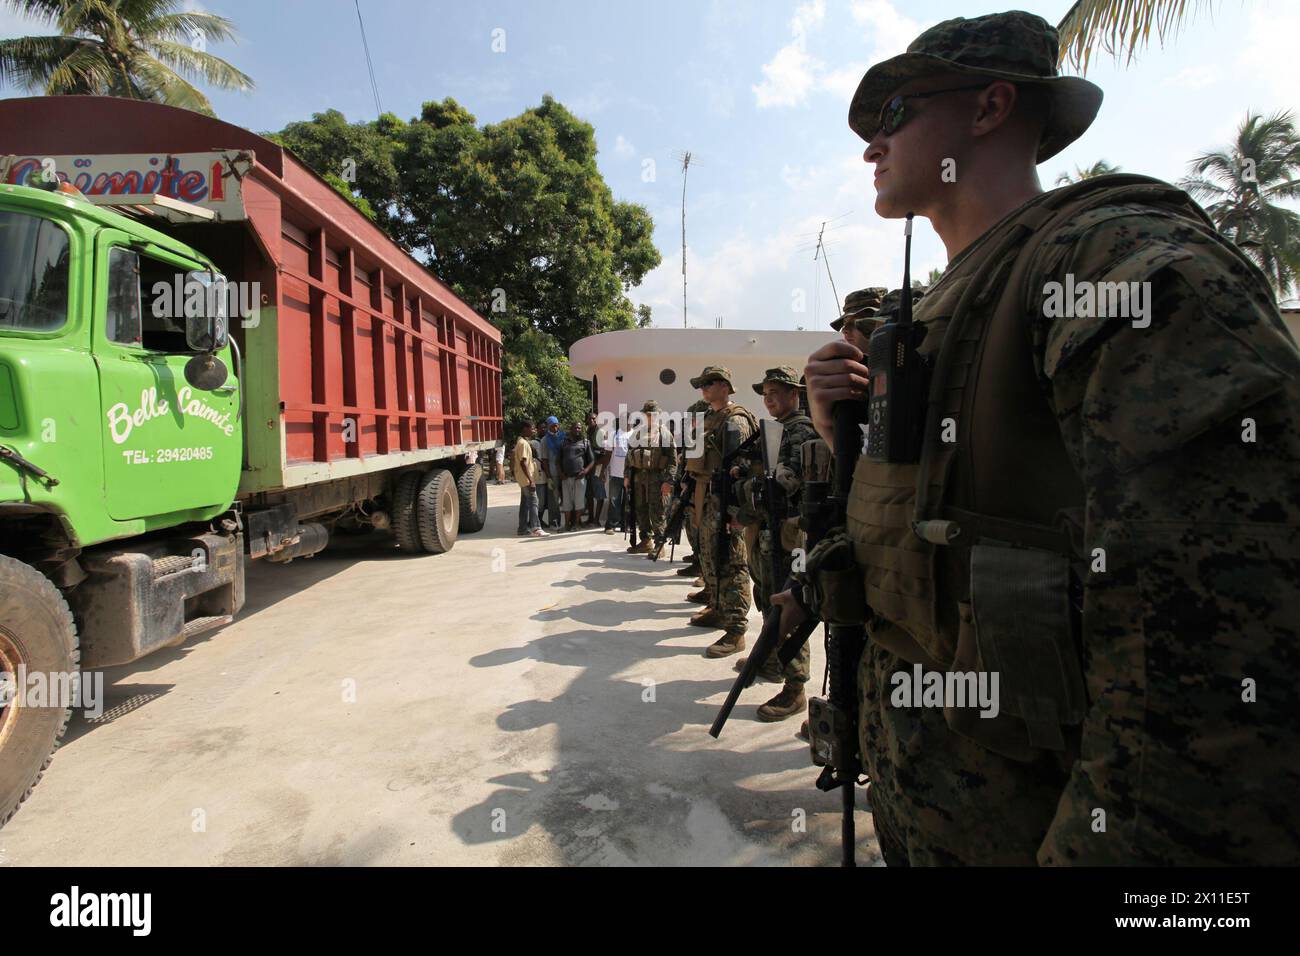 U.S. Marine 1st Lt. Gregory Meyer, a platoon commander with Battalion Landing Team, 3rd Battalion, 2nd Marine Regiment, 22nd Marine Expeditionary Unit, along with other Marines from the BLT provide security for a food supply truck during a supply mission in Leogane, Haiti, Jan. 20, 2010. The supply mission was the first humanitarian assistance operation conducted by the 22nd MEU since they arrived in Haiti. Stock Photo